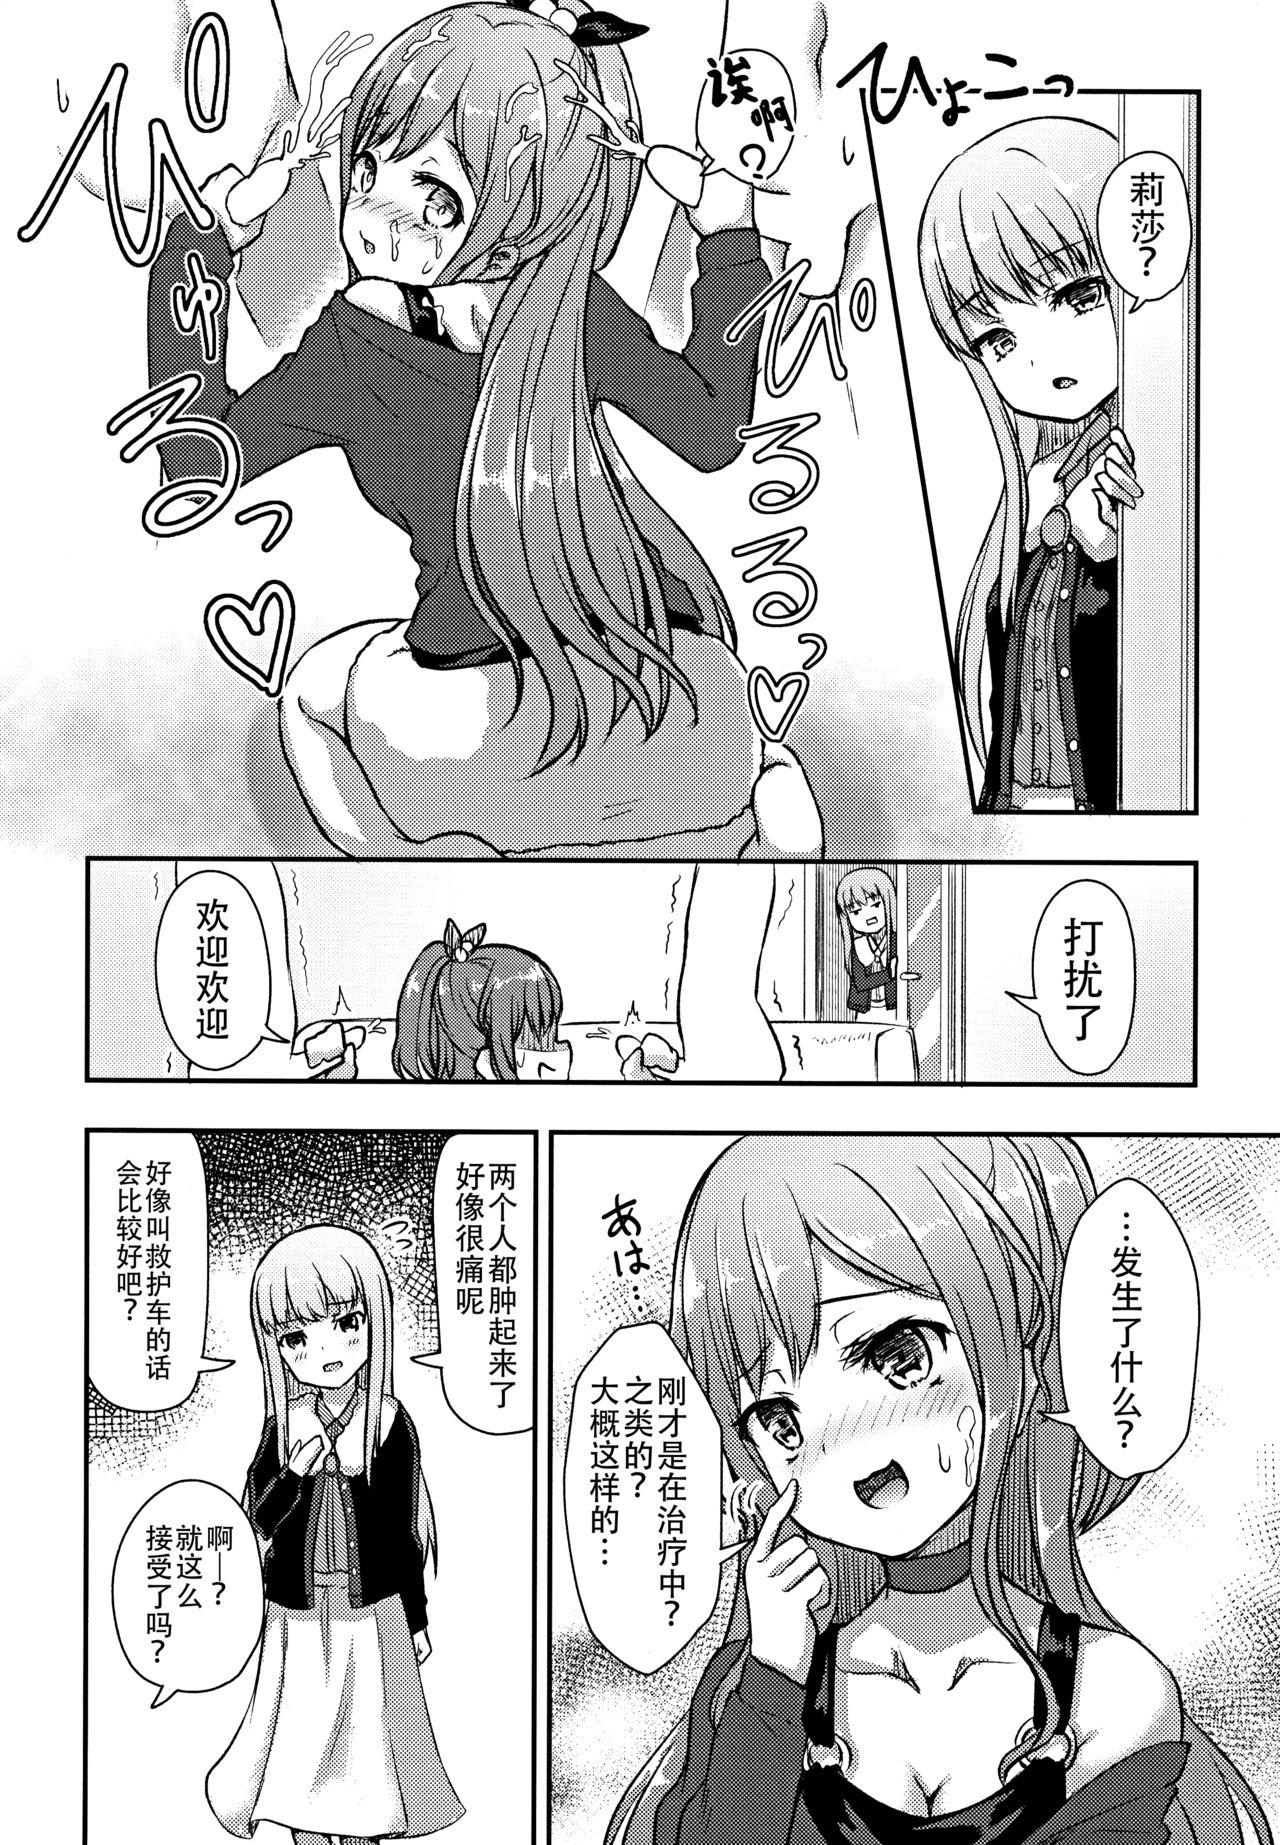 Nudes Hearty Hybrid Household - Bang dream Rabo - Page 10